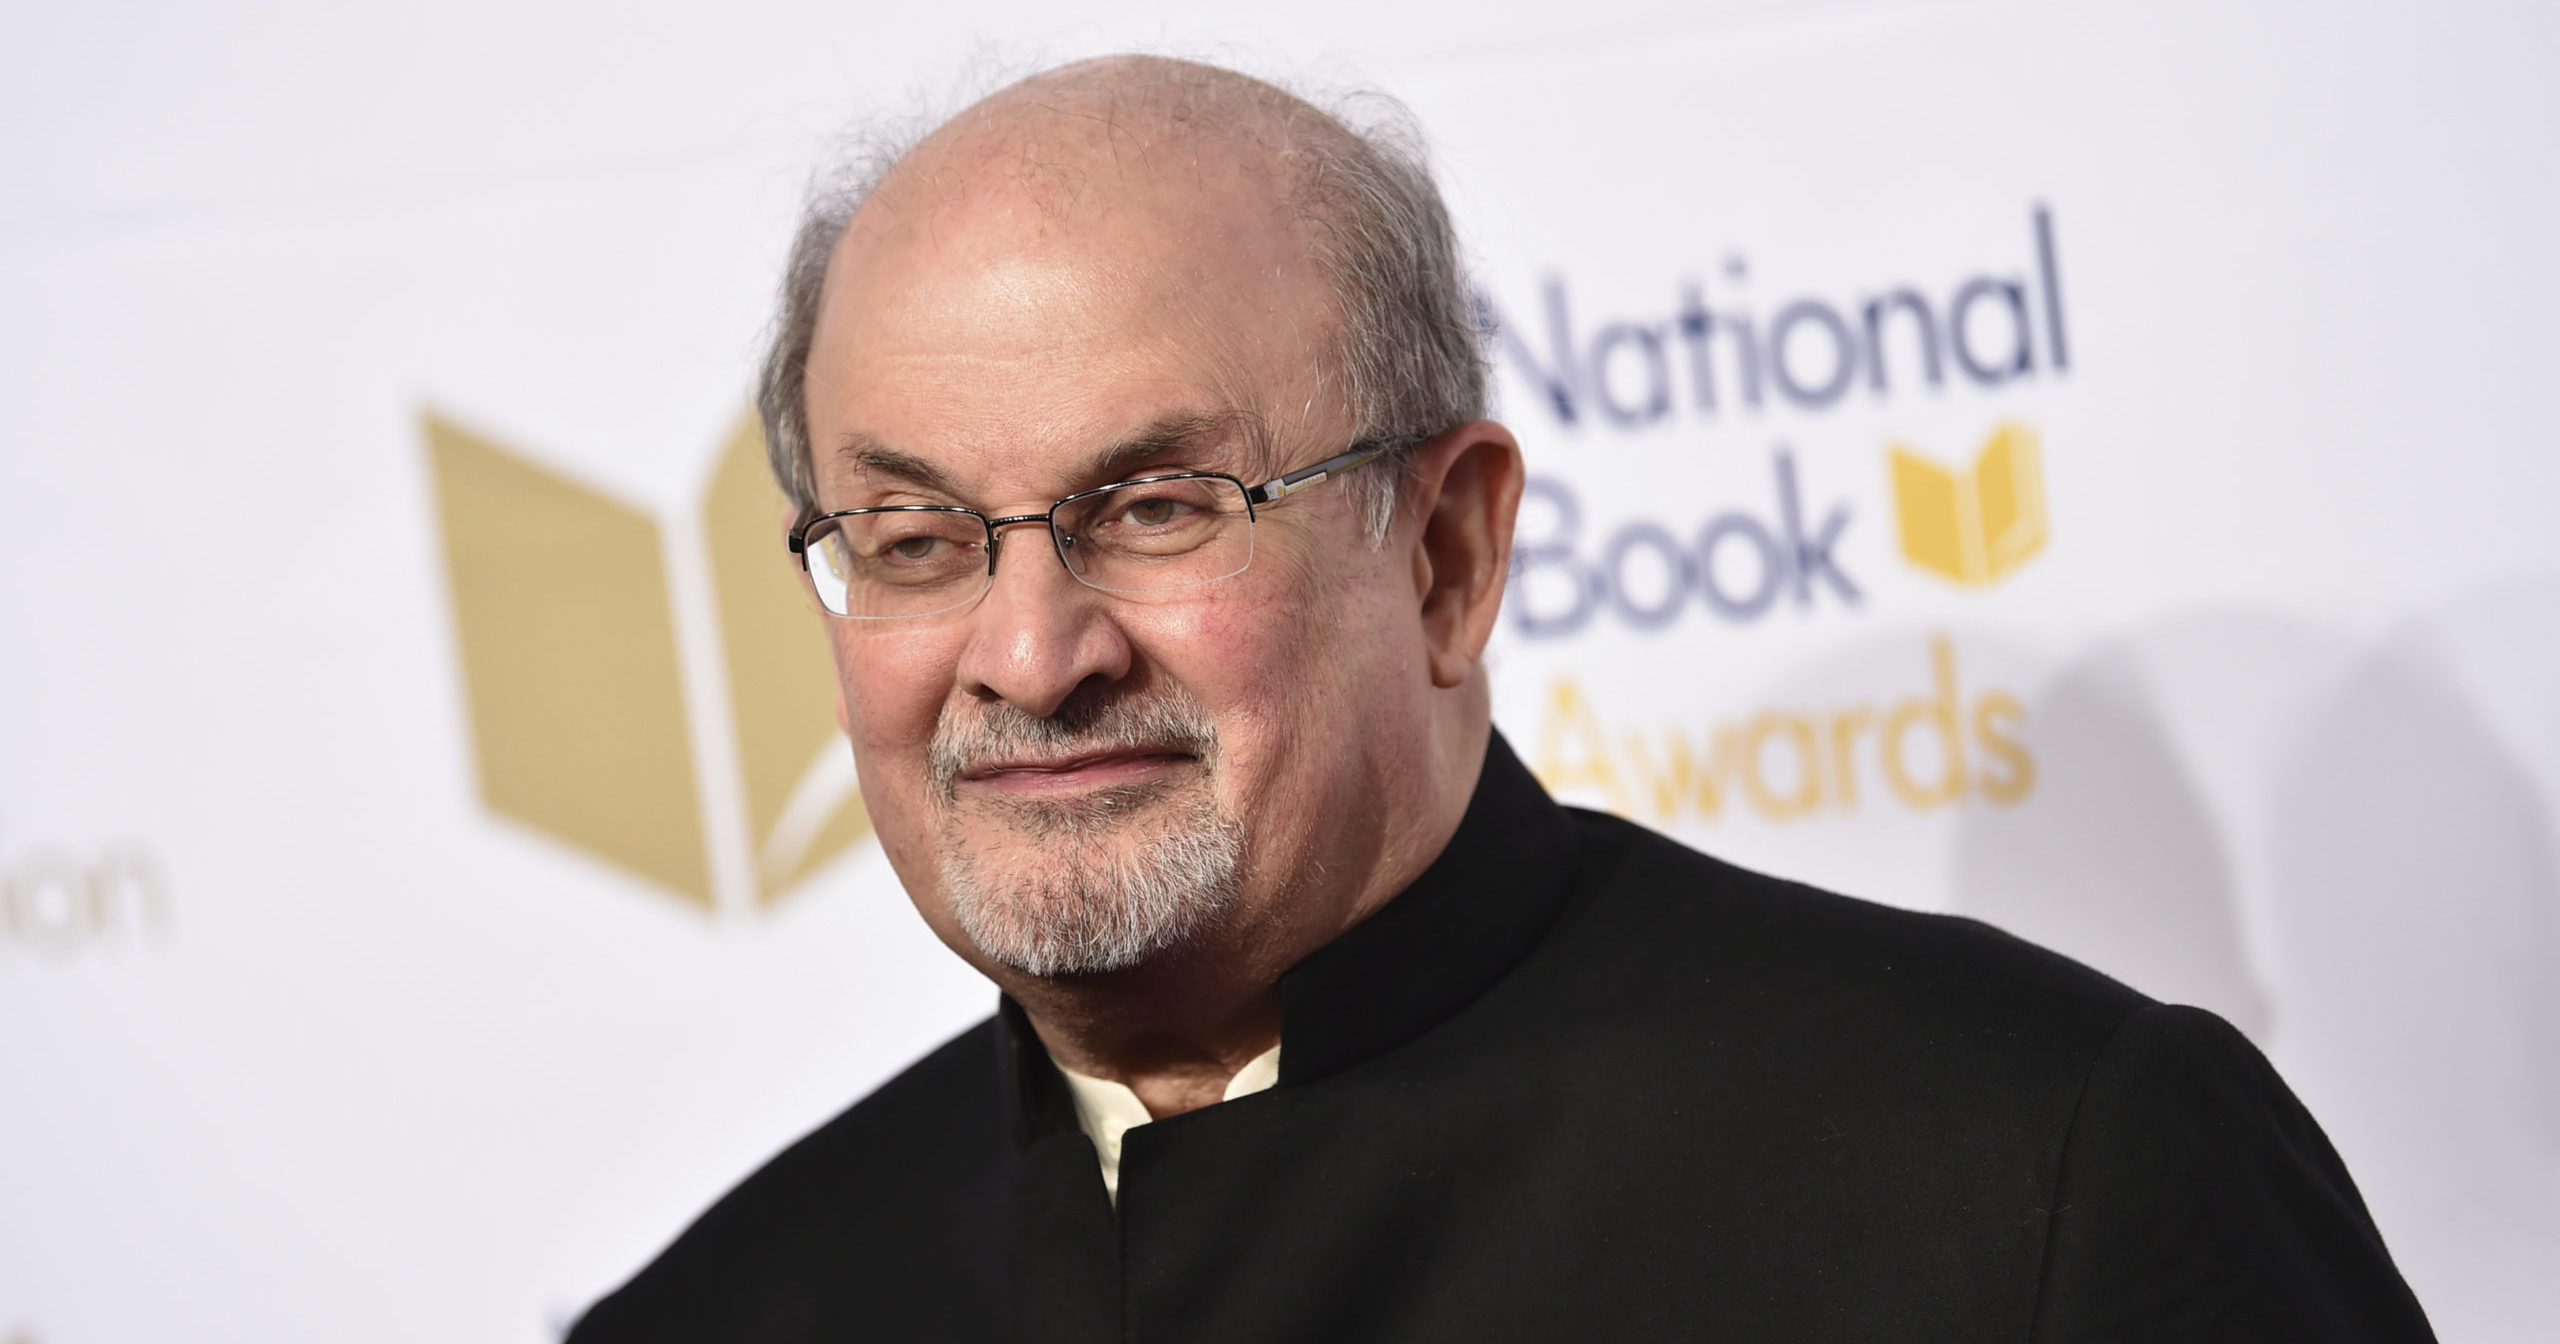 Author Salman Rushdie attends the 68th National Book Awards Ceremony and Benefit Dinner in New York City on Nov. 15, 2017.